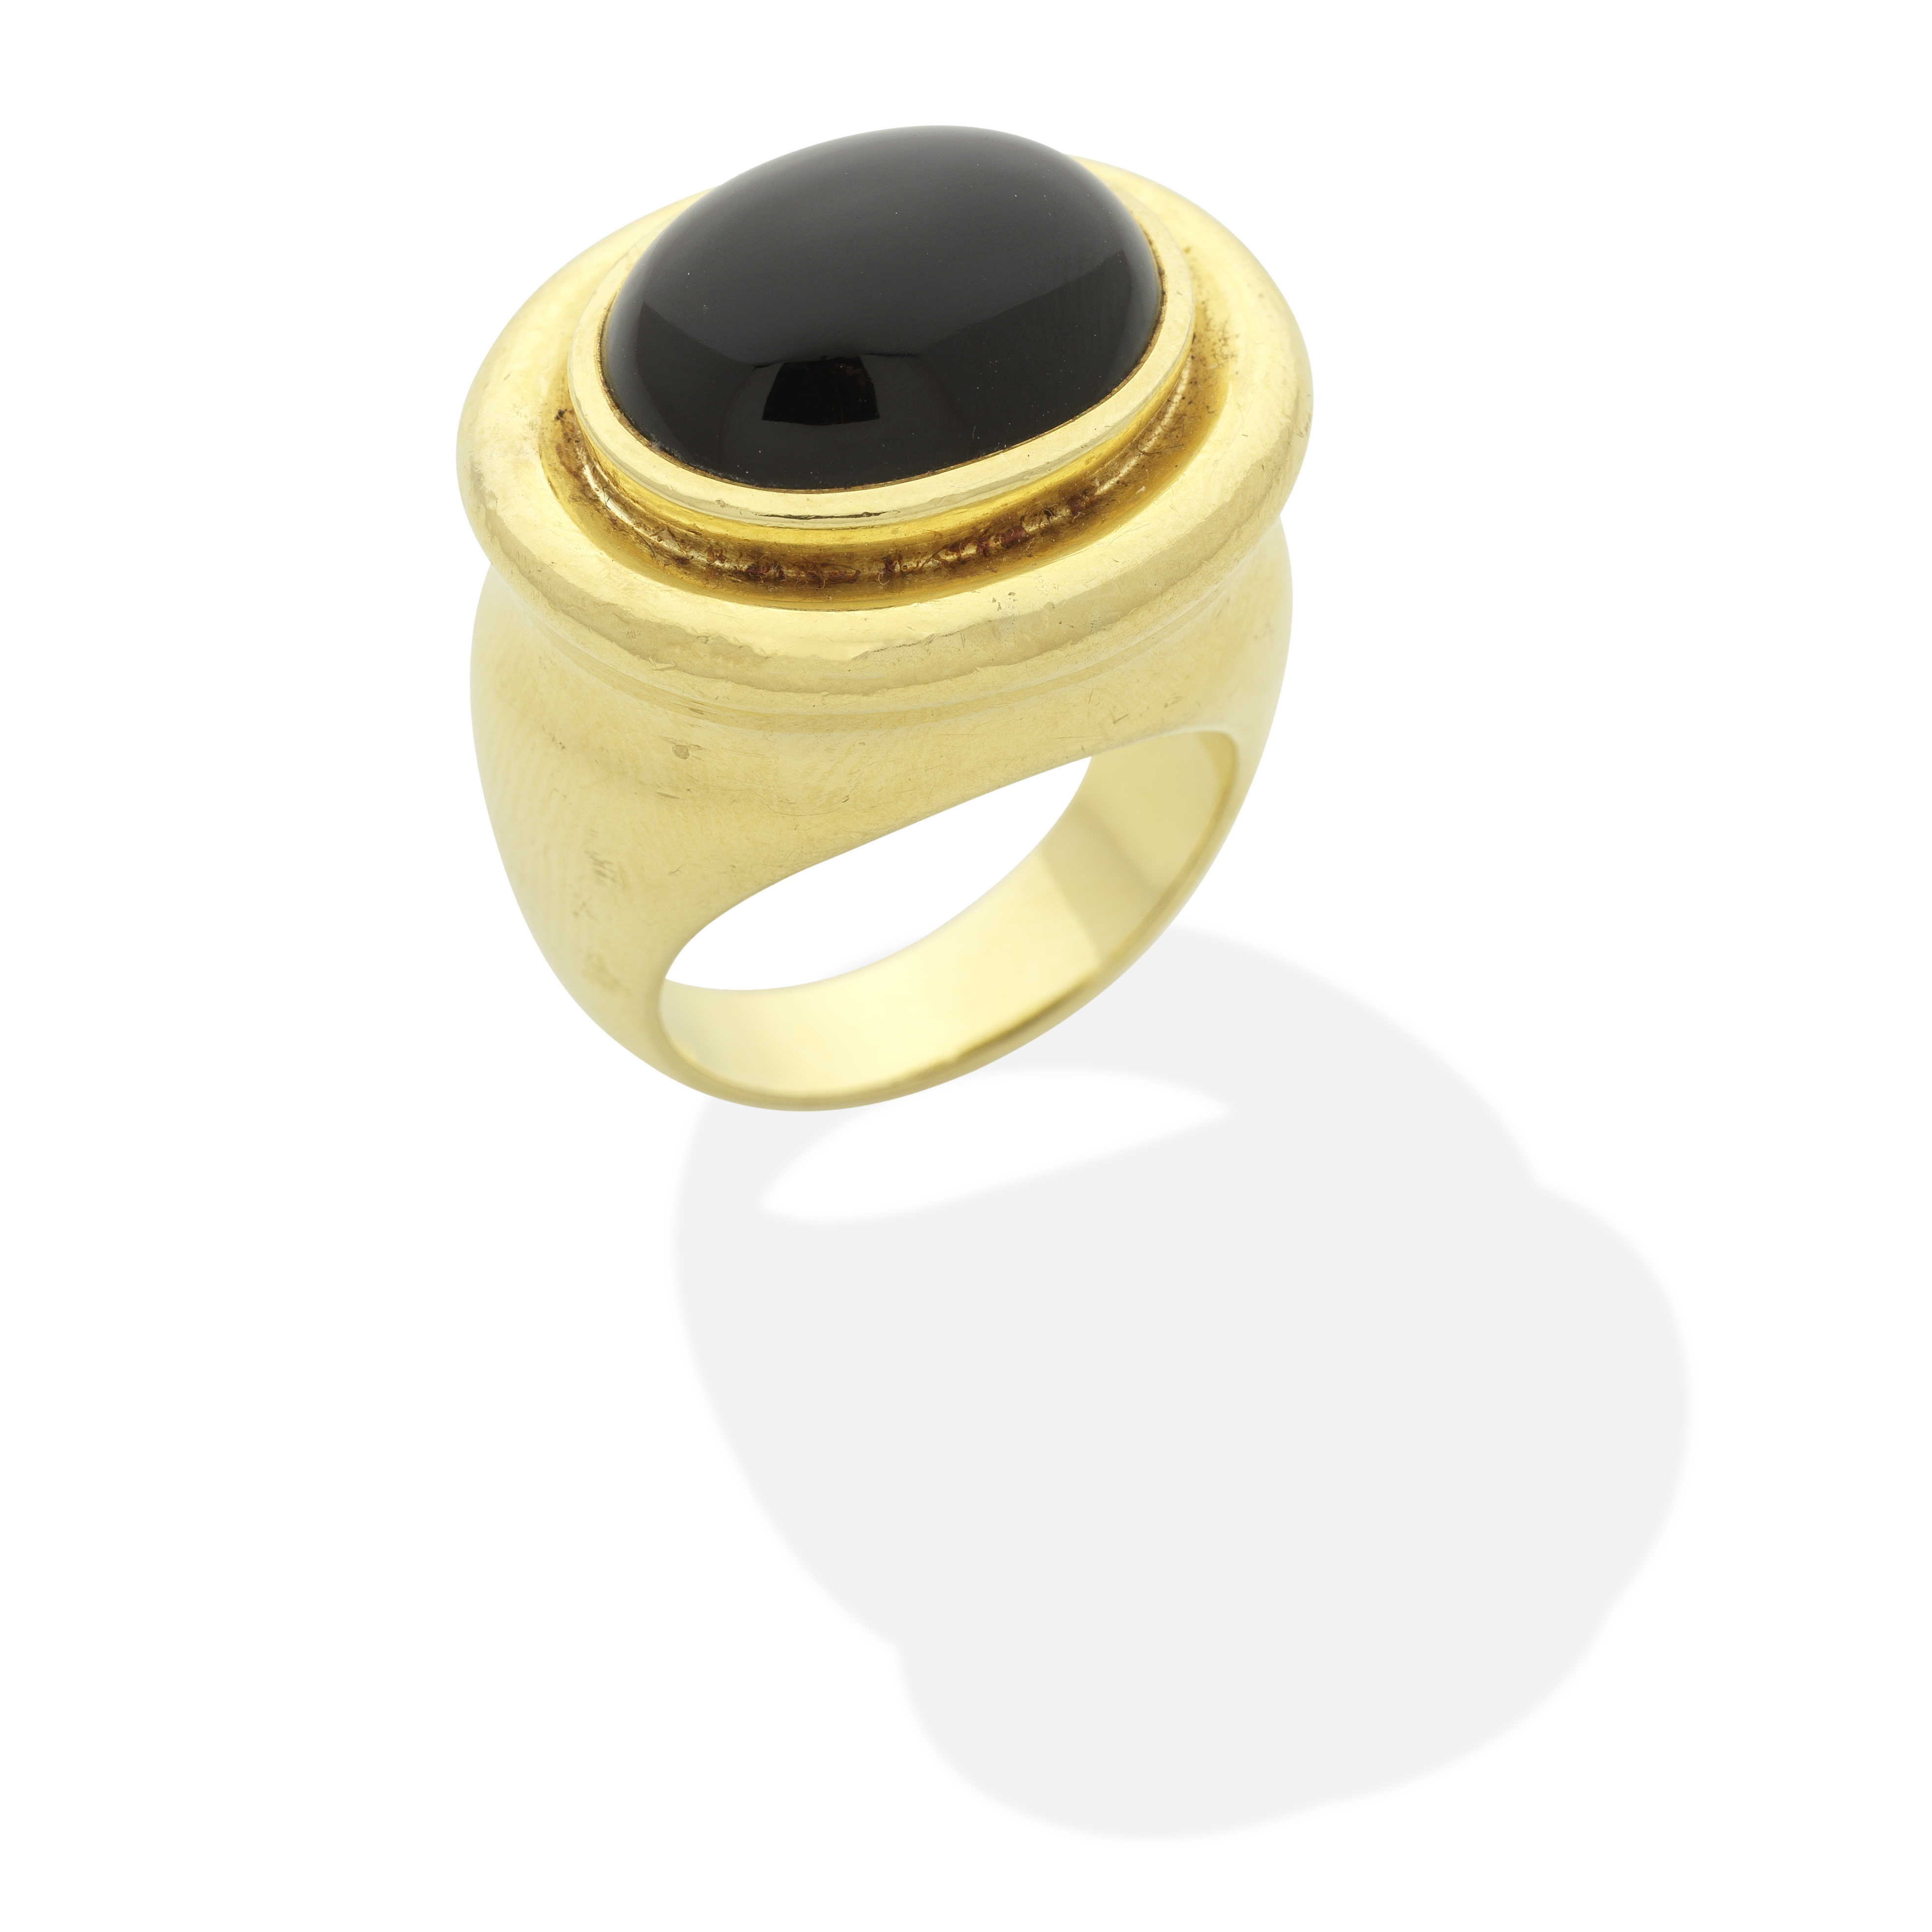 PALOMA PICASSO FOR TIFFANY: ONYX DRESS RING,